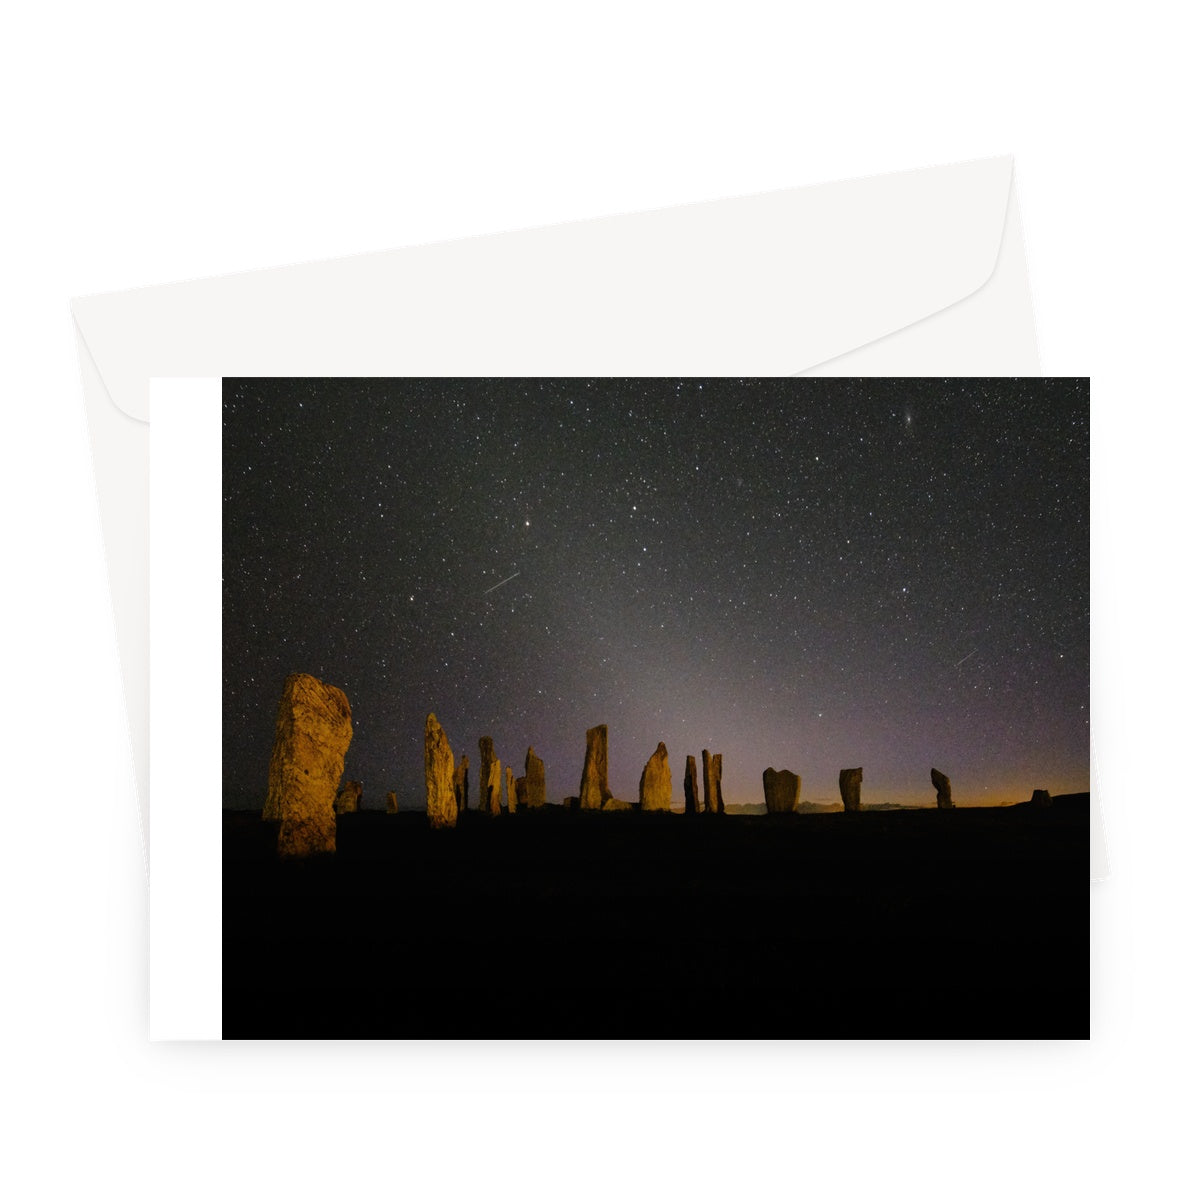 Callanish and Zodiacal light Greeting Card